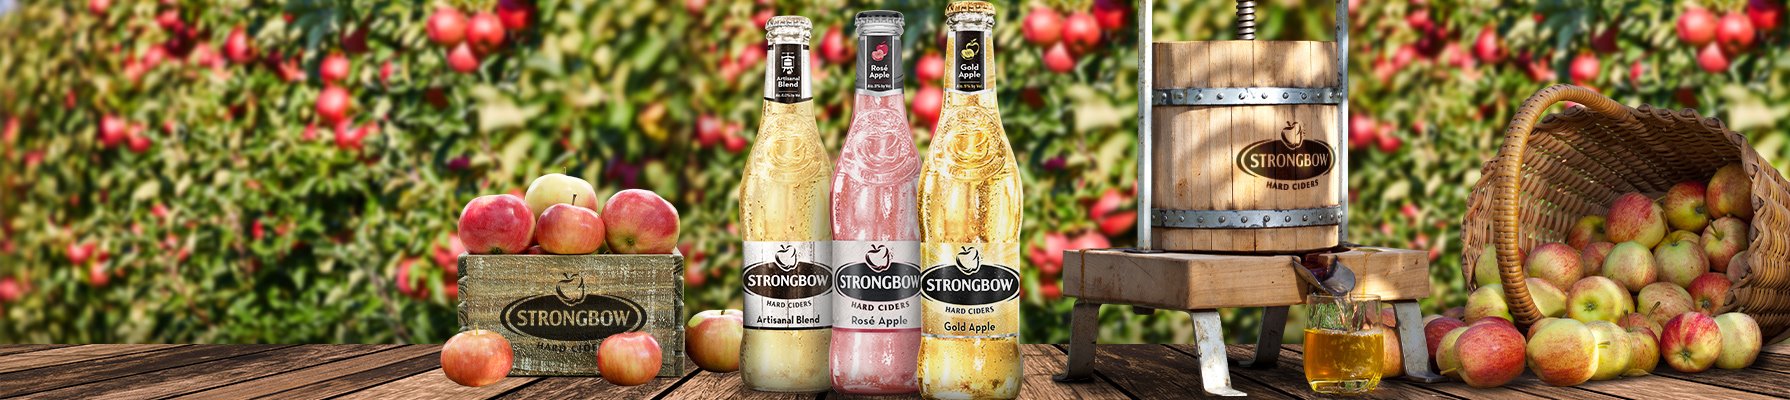 Strongbow US Cider Making Page Article Image 3